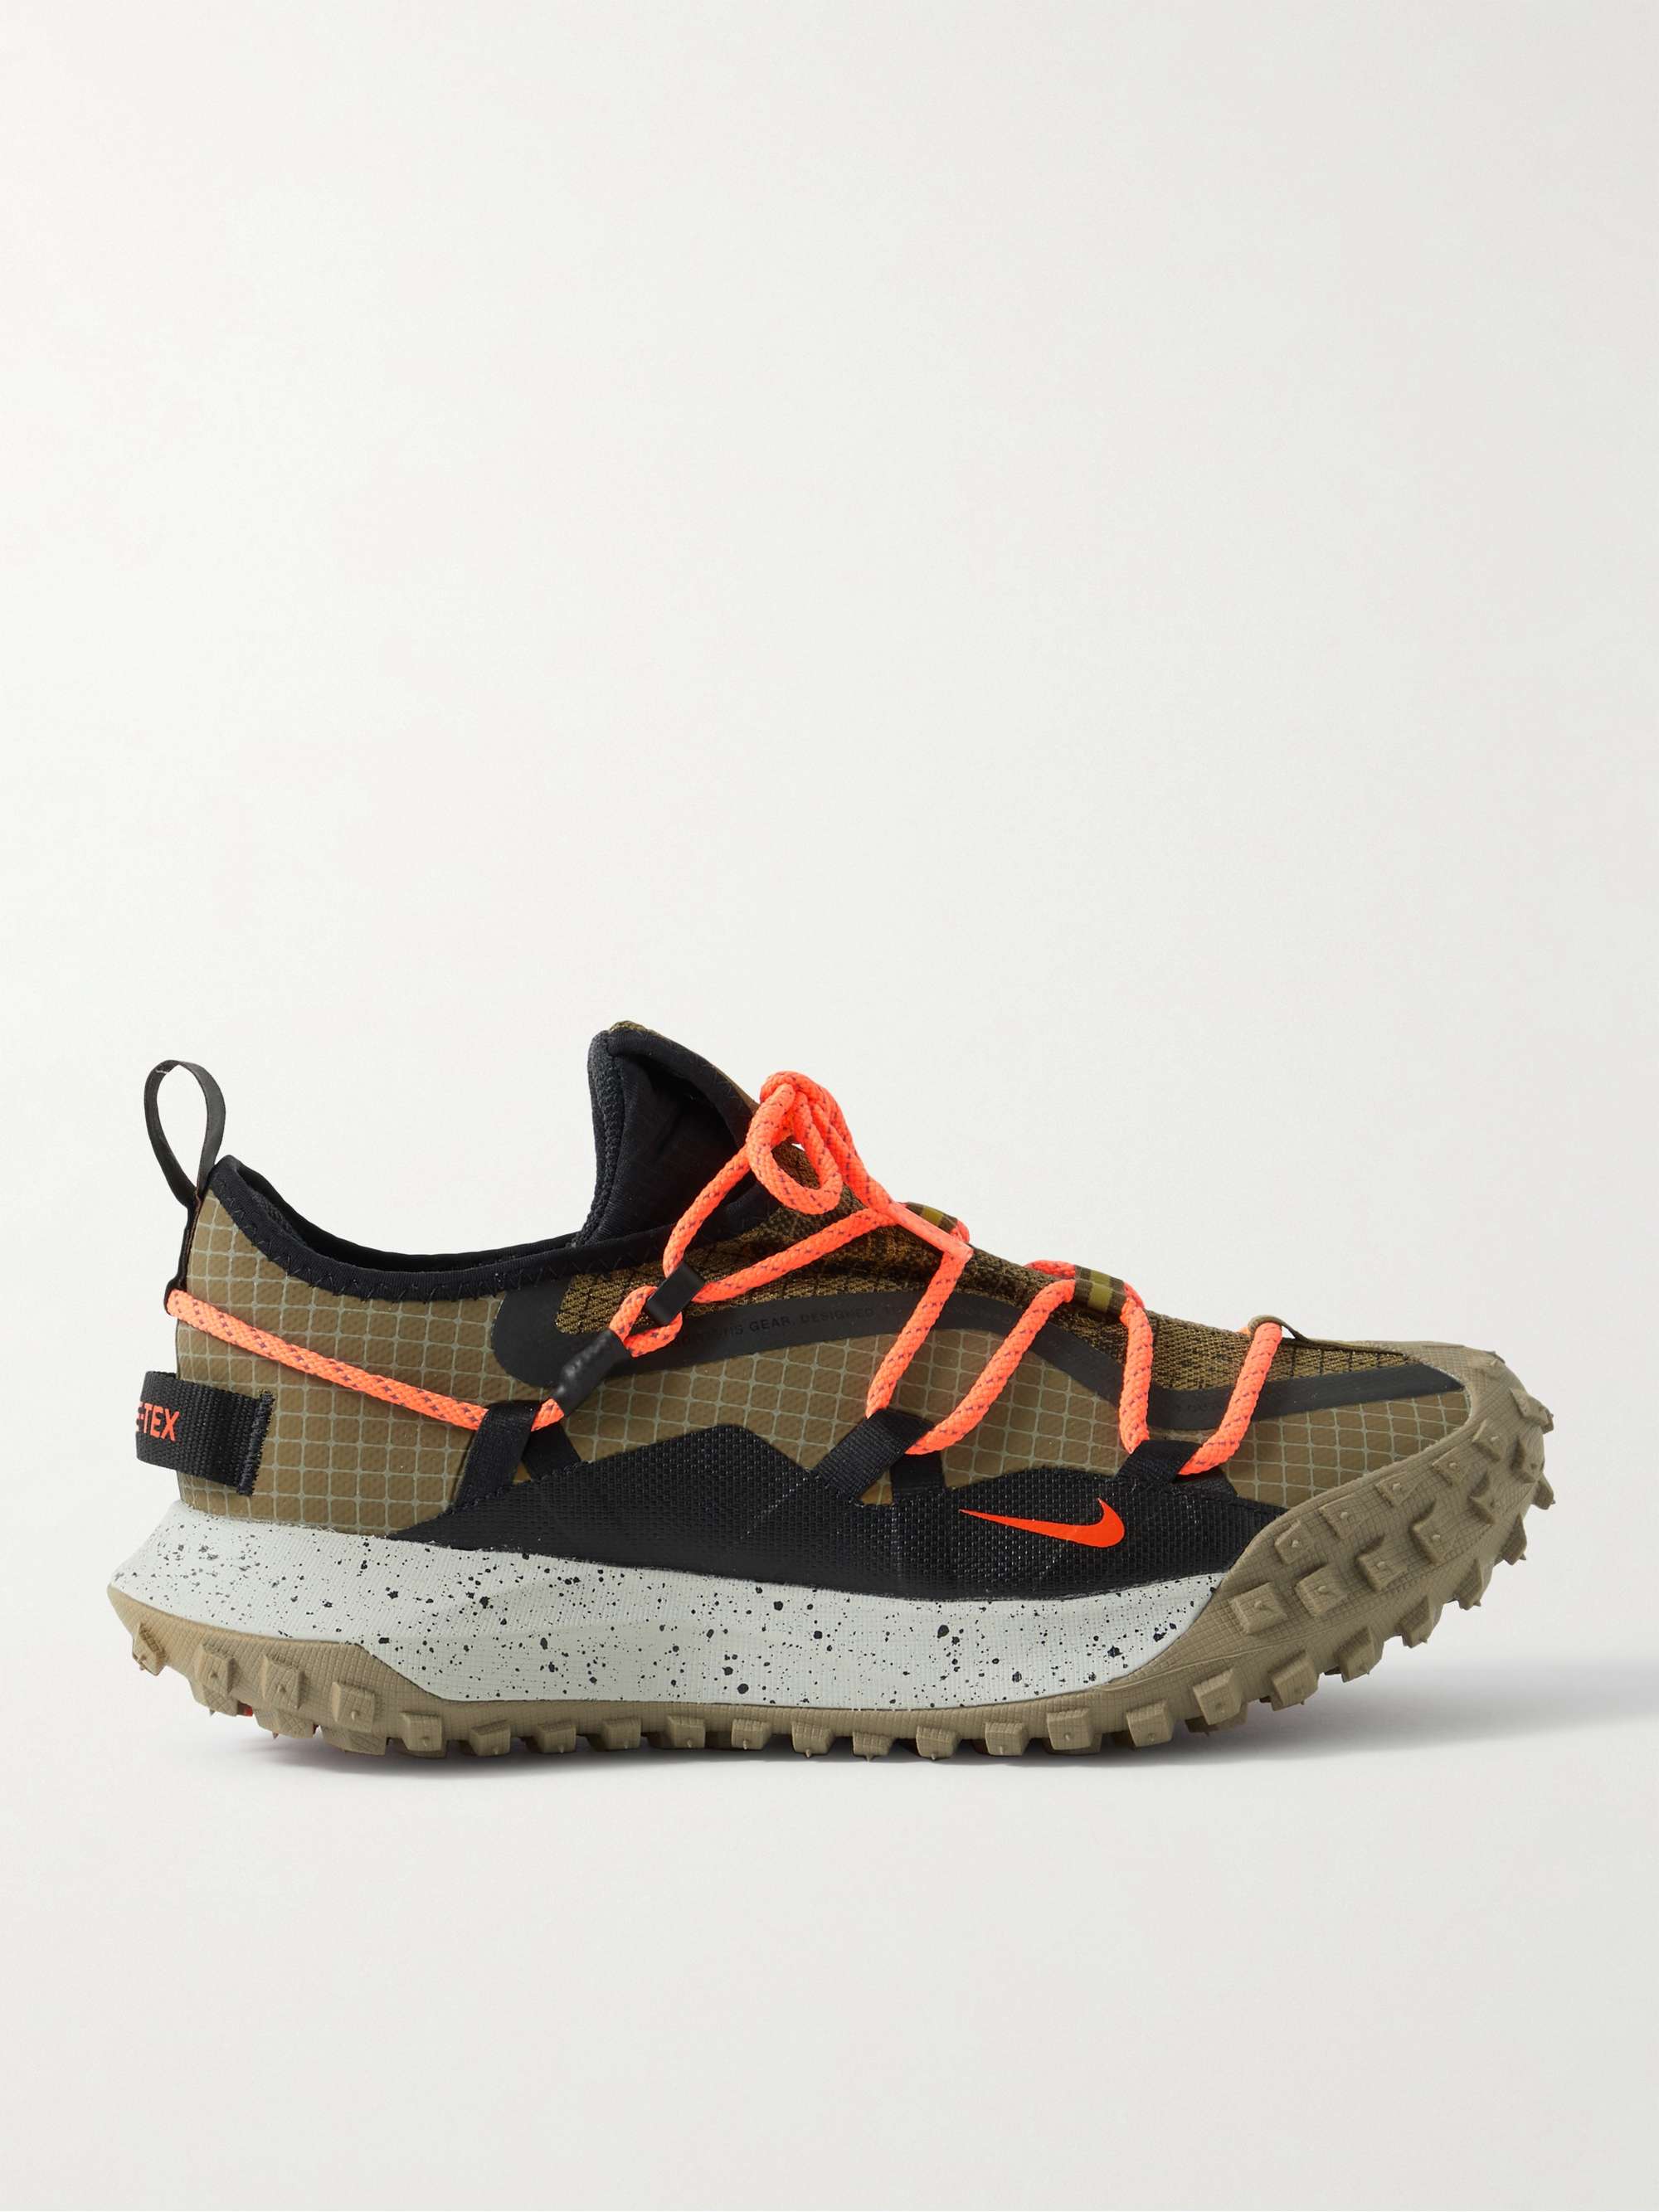 Brown ACG Mountain Fly Rubber-Trimmed GORE-TEX Sneakers | NIKE | MR PORTER